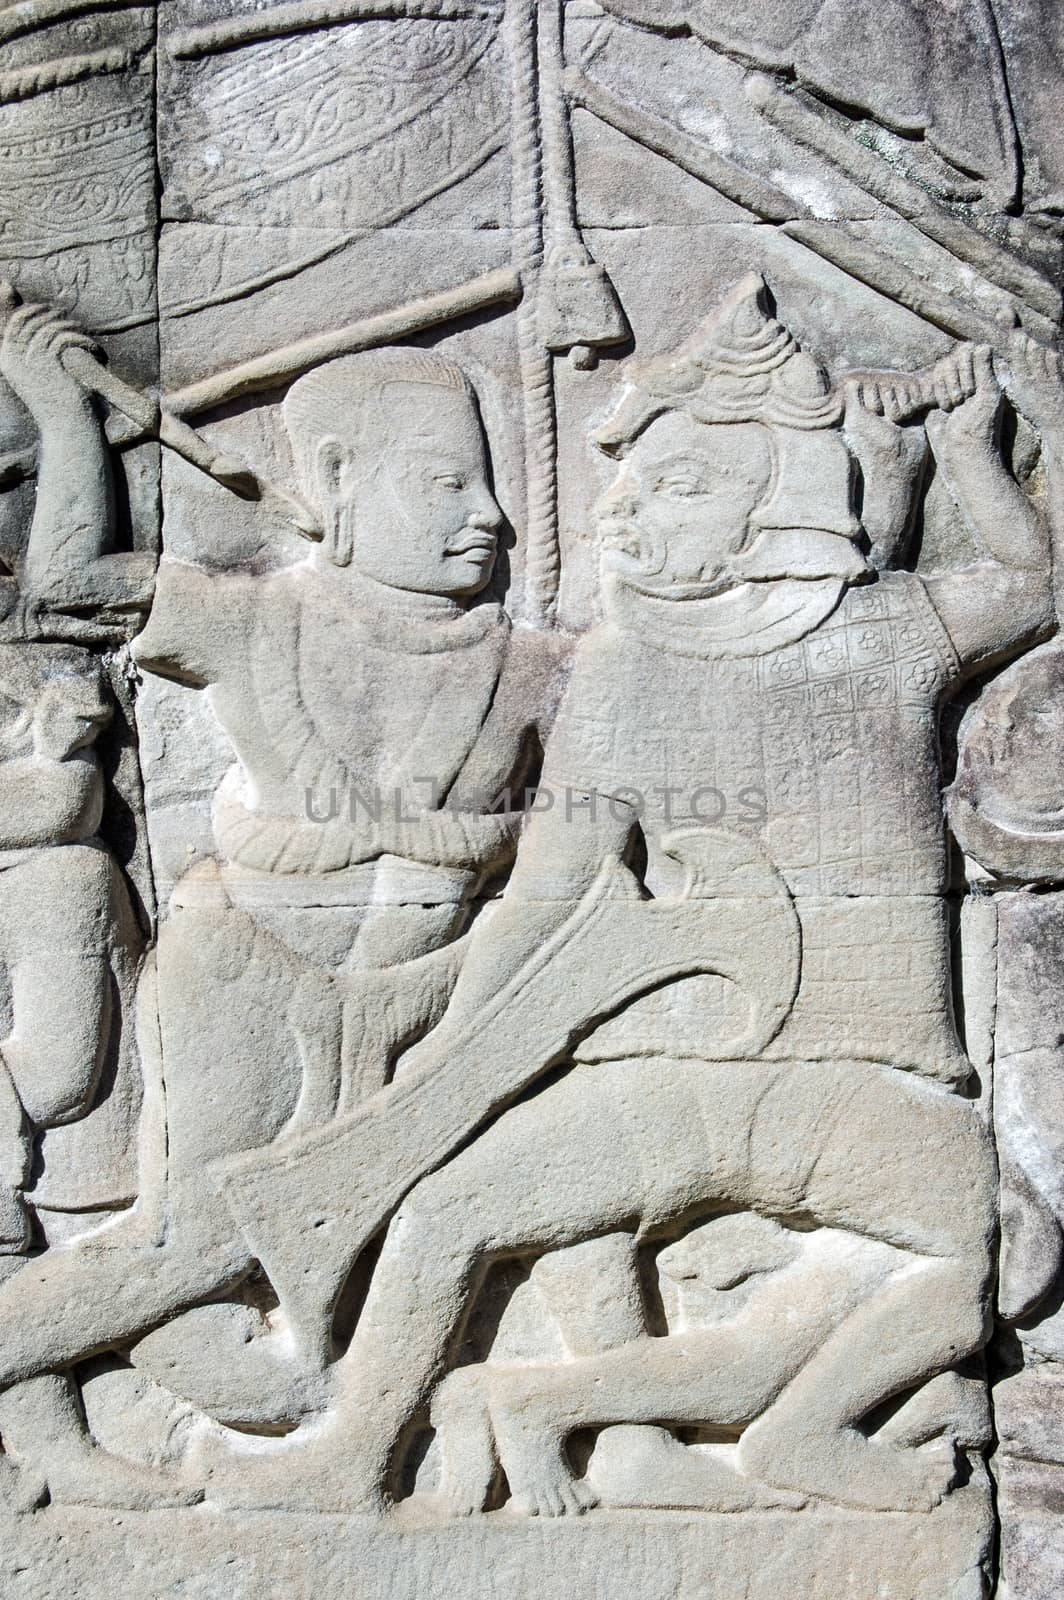 Ancient bas relief carving showing a Khmer and a Cham soldier fighting. Wall of Bayon Temple, Angkor Thom, Siem Reap, Cambodia.